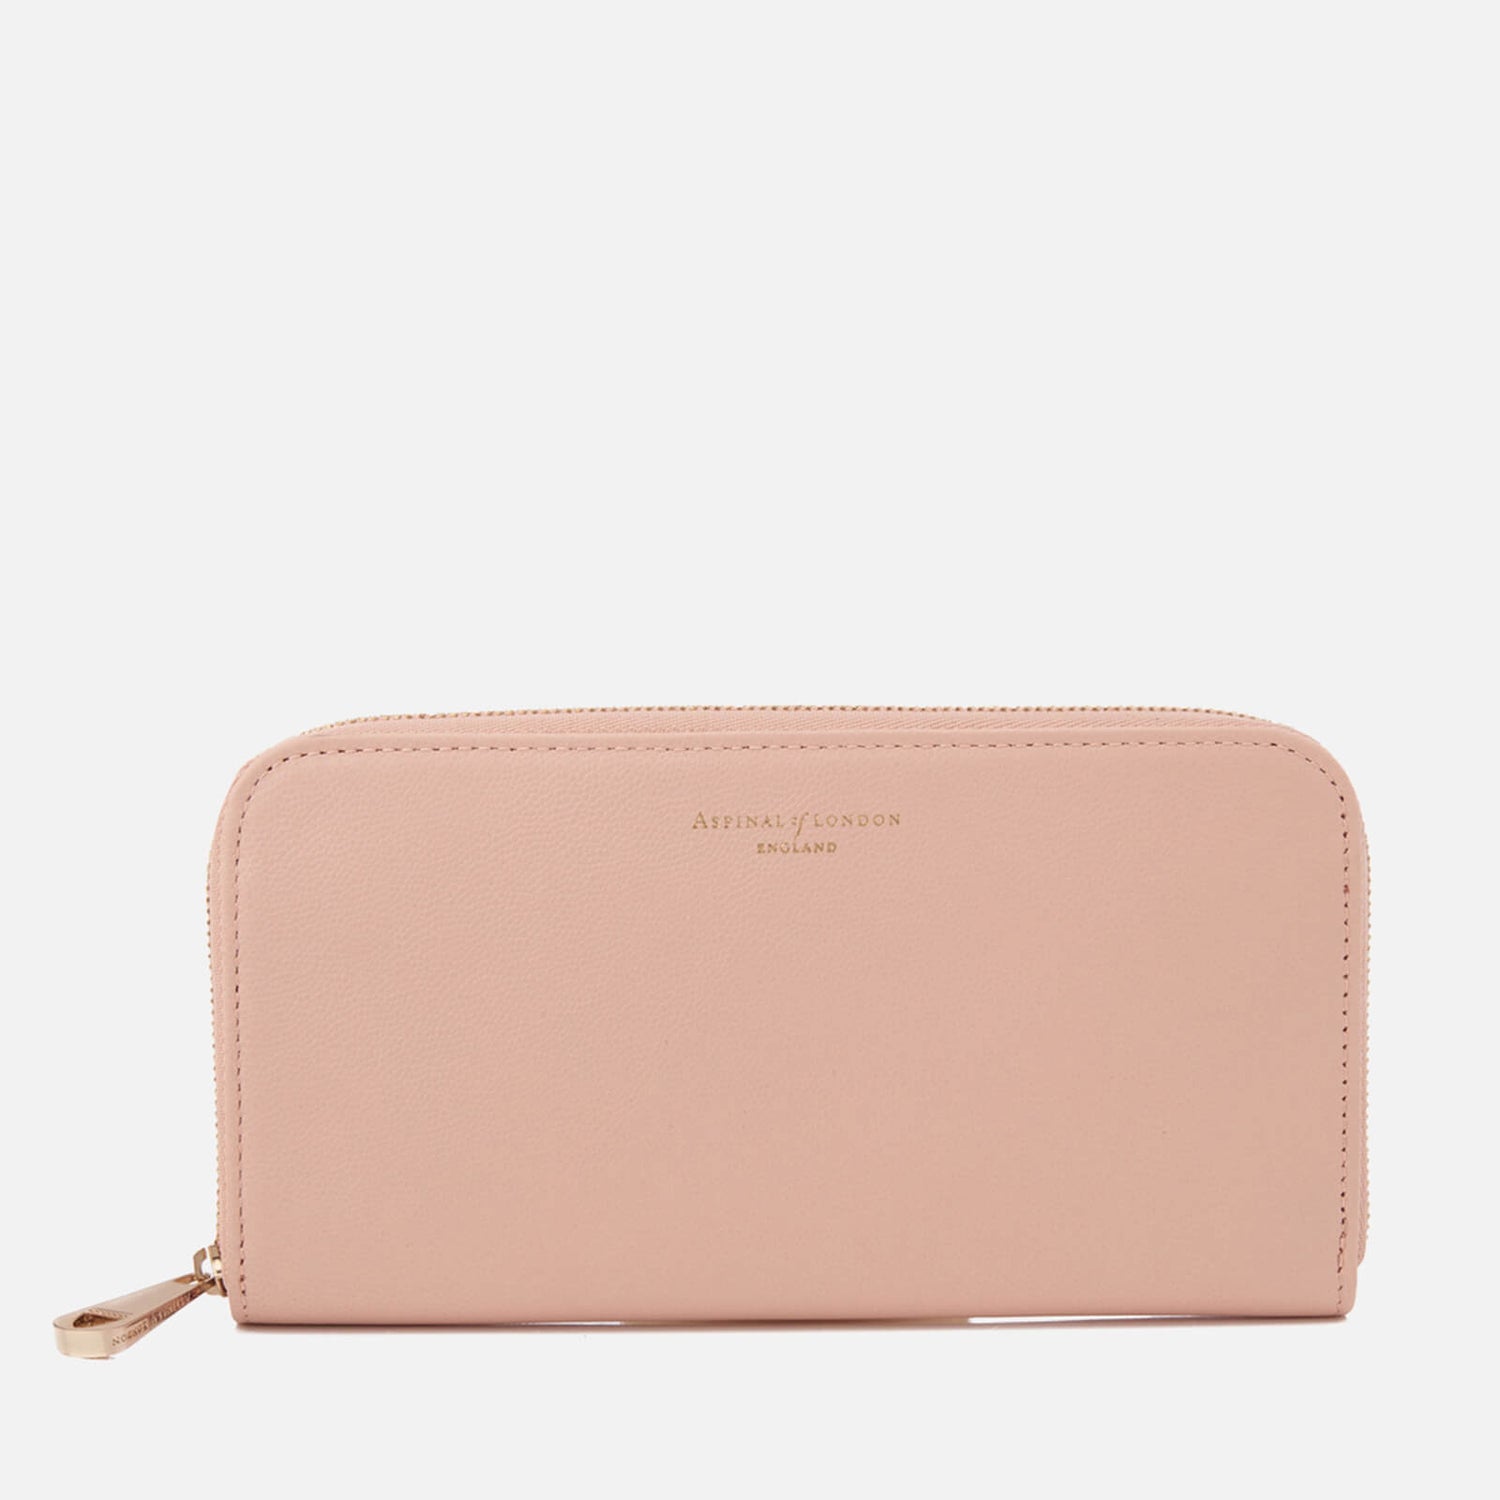 Aspinal of London Women's Continental Clutch Wallet - Peach Gold - Free ...